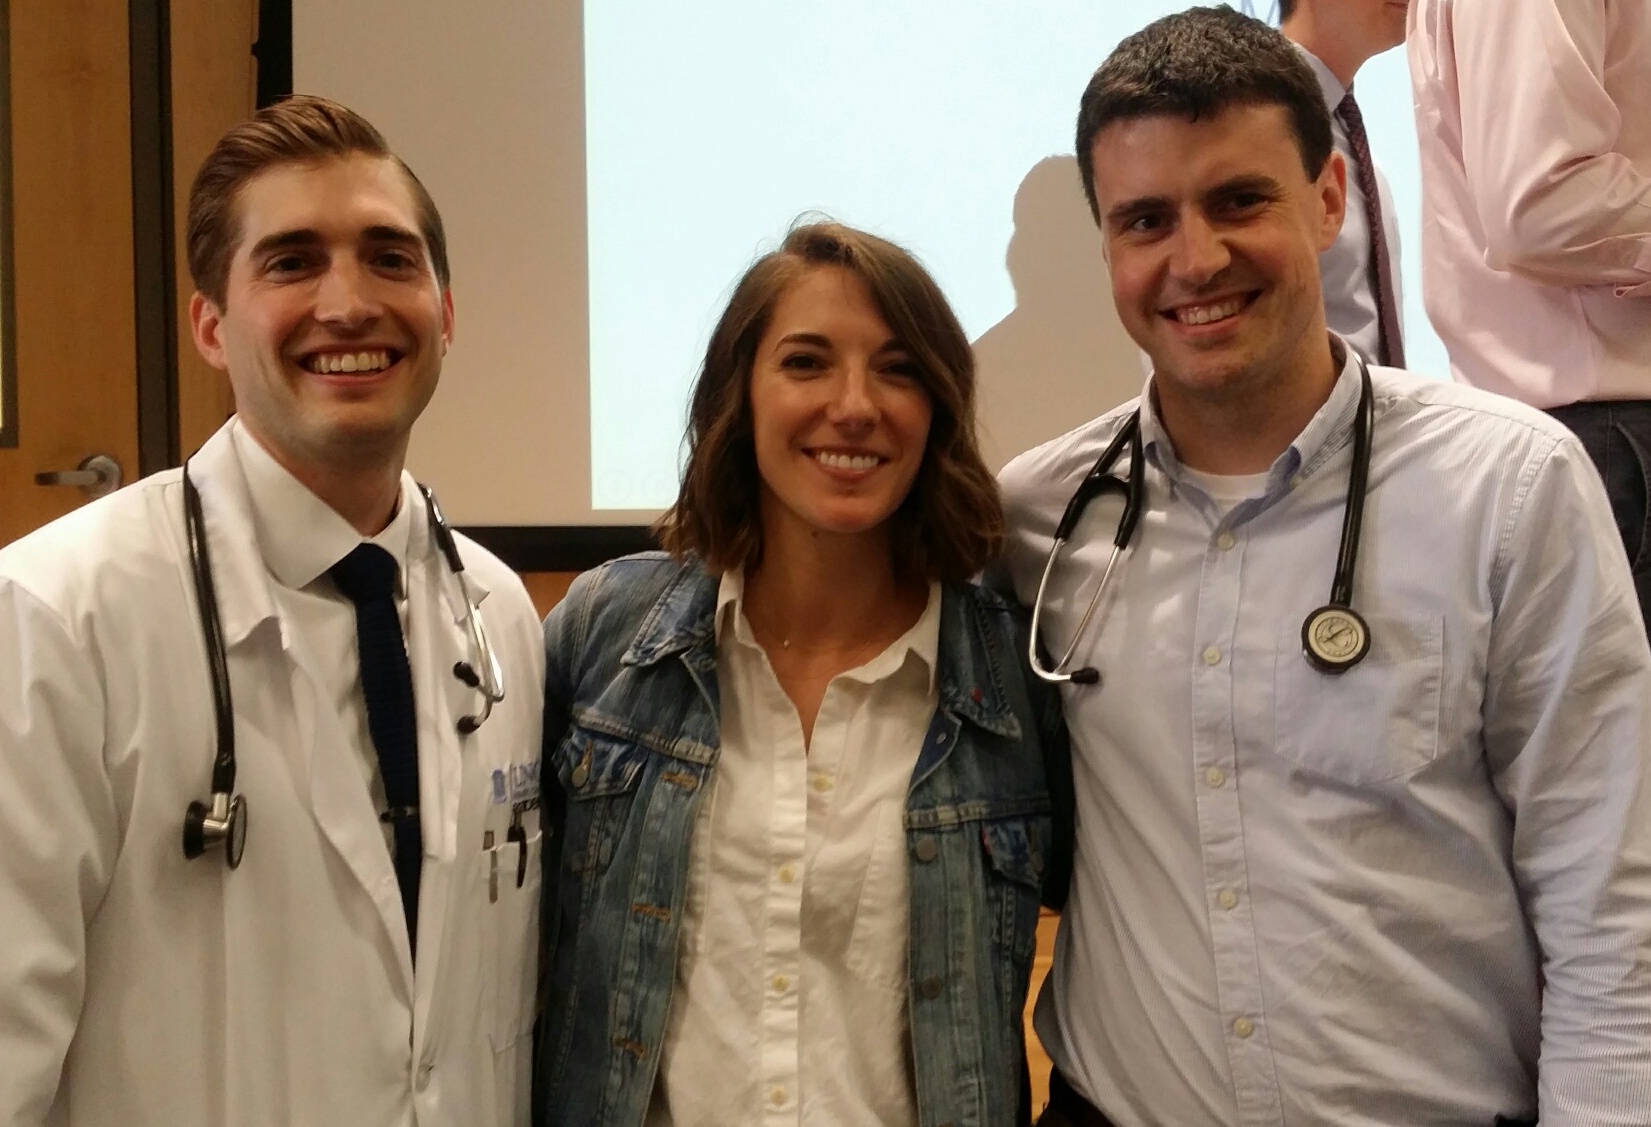 Recipients of the Ontjes Award: David Lynch, MD, Erin Finn, MD, and Jefferson Peeples, MD (Not pictured--Leann Cataze, MD) 